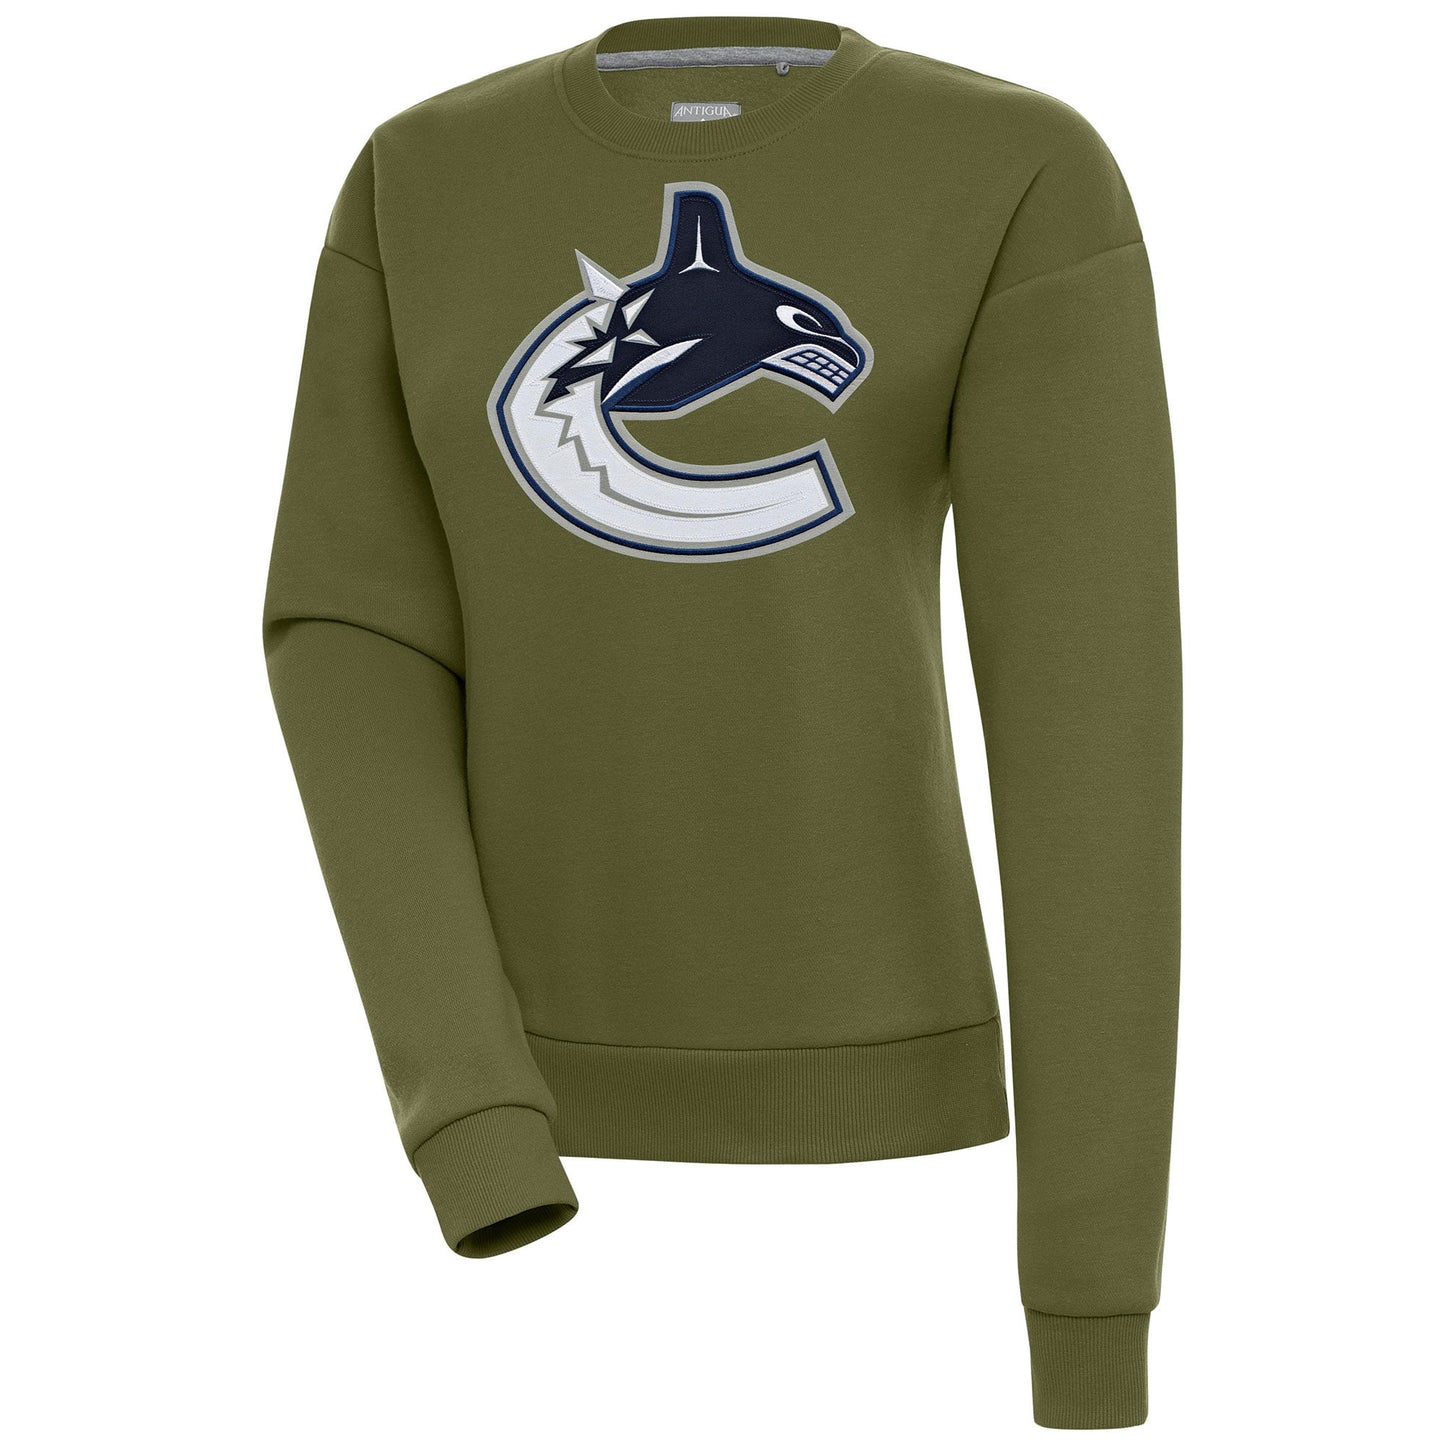 Women's Antigua Olive Vancouver Canucks Victory Pullover Sweatshirt